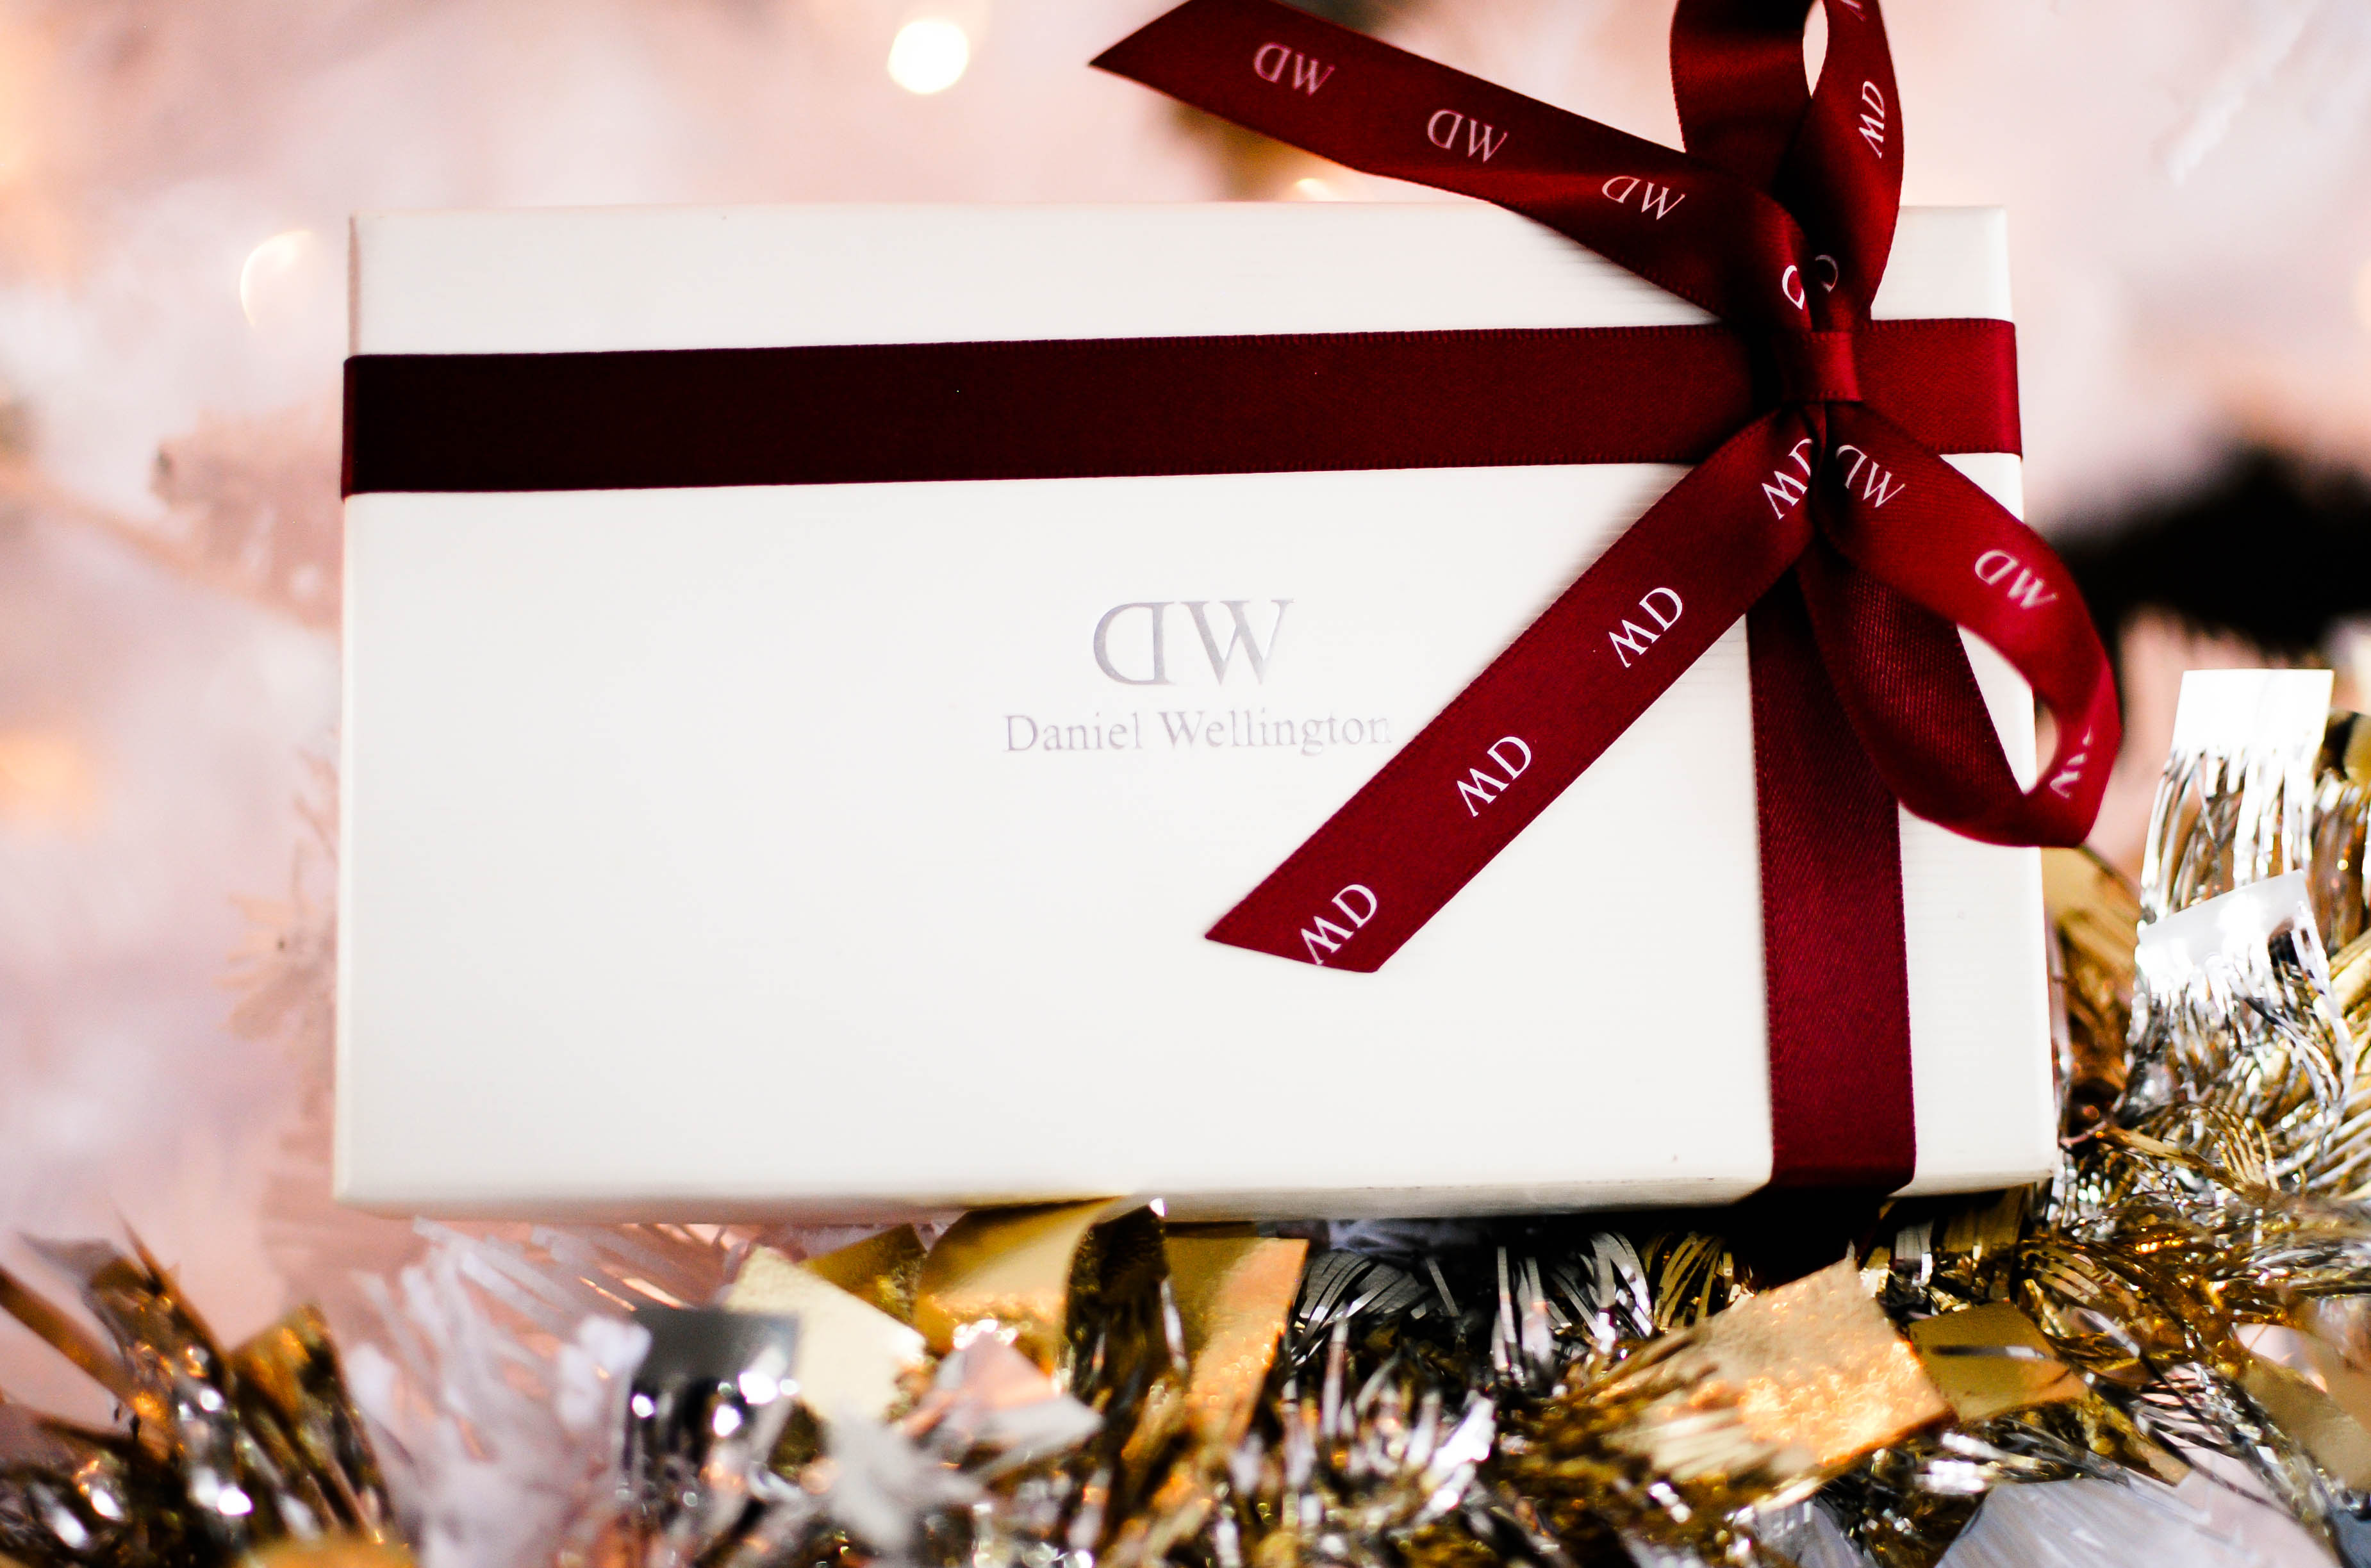 vanessa-lambert-blogger-behind-what-would-v-wear-wears-the-perfect-holiday-gift-a-classic-black-daniel-wellington-watch-_6